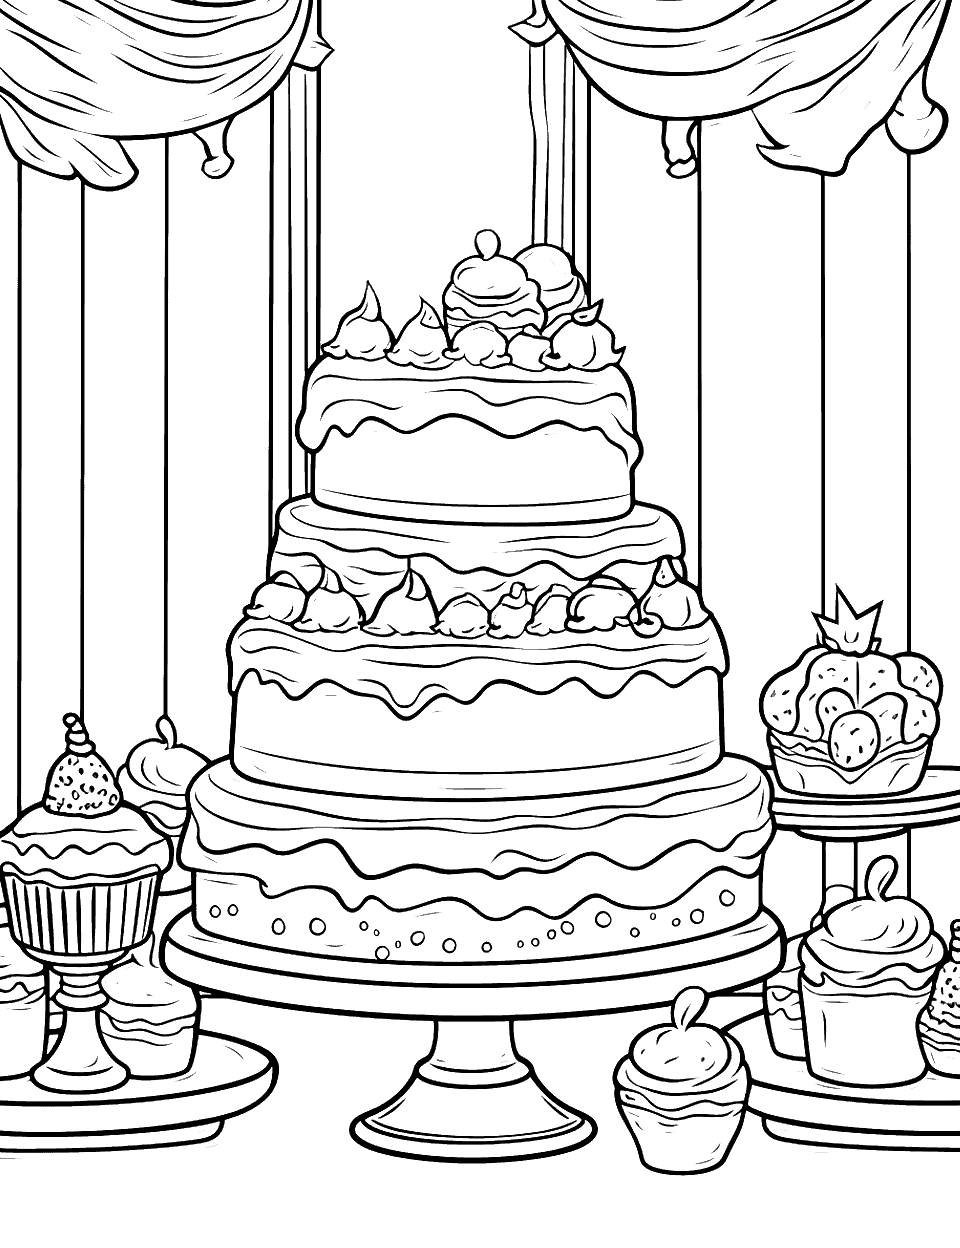 Detailed Cake Shop Coloring Page - An interior view of a cake shop with cakes of different shapes and sizes on display.